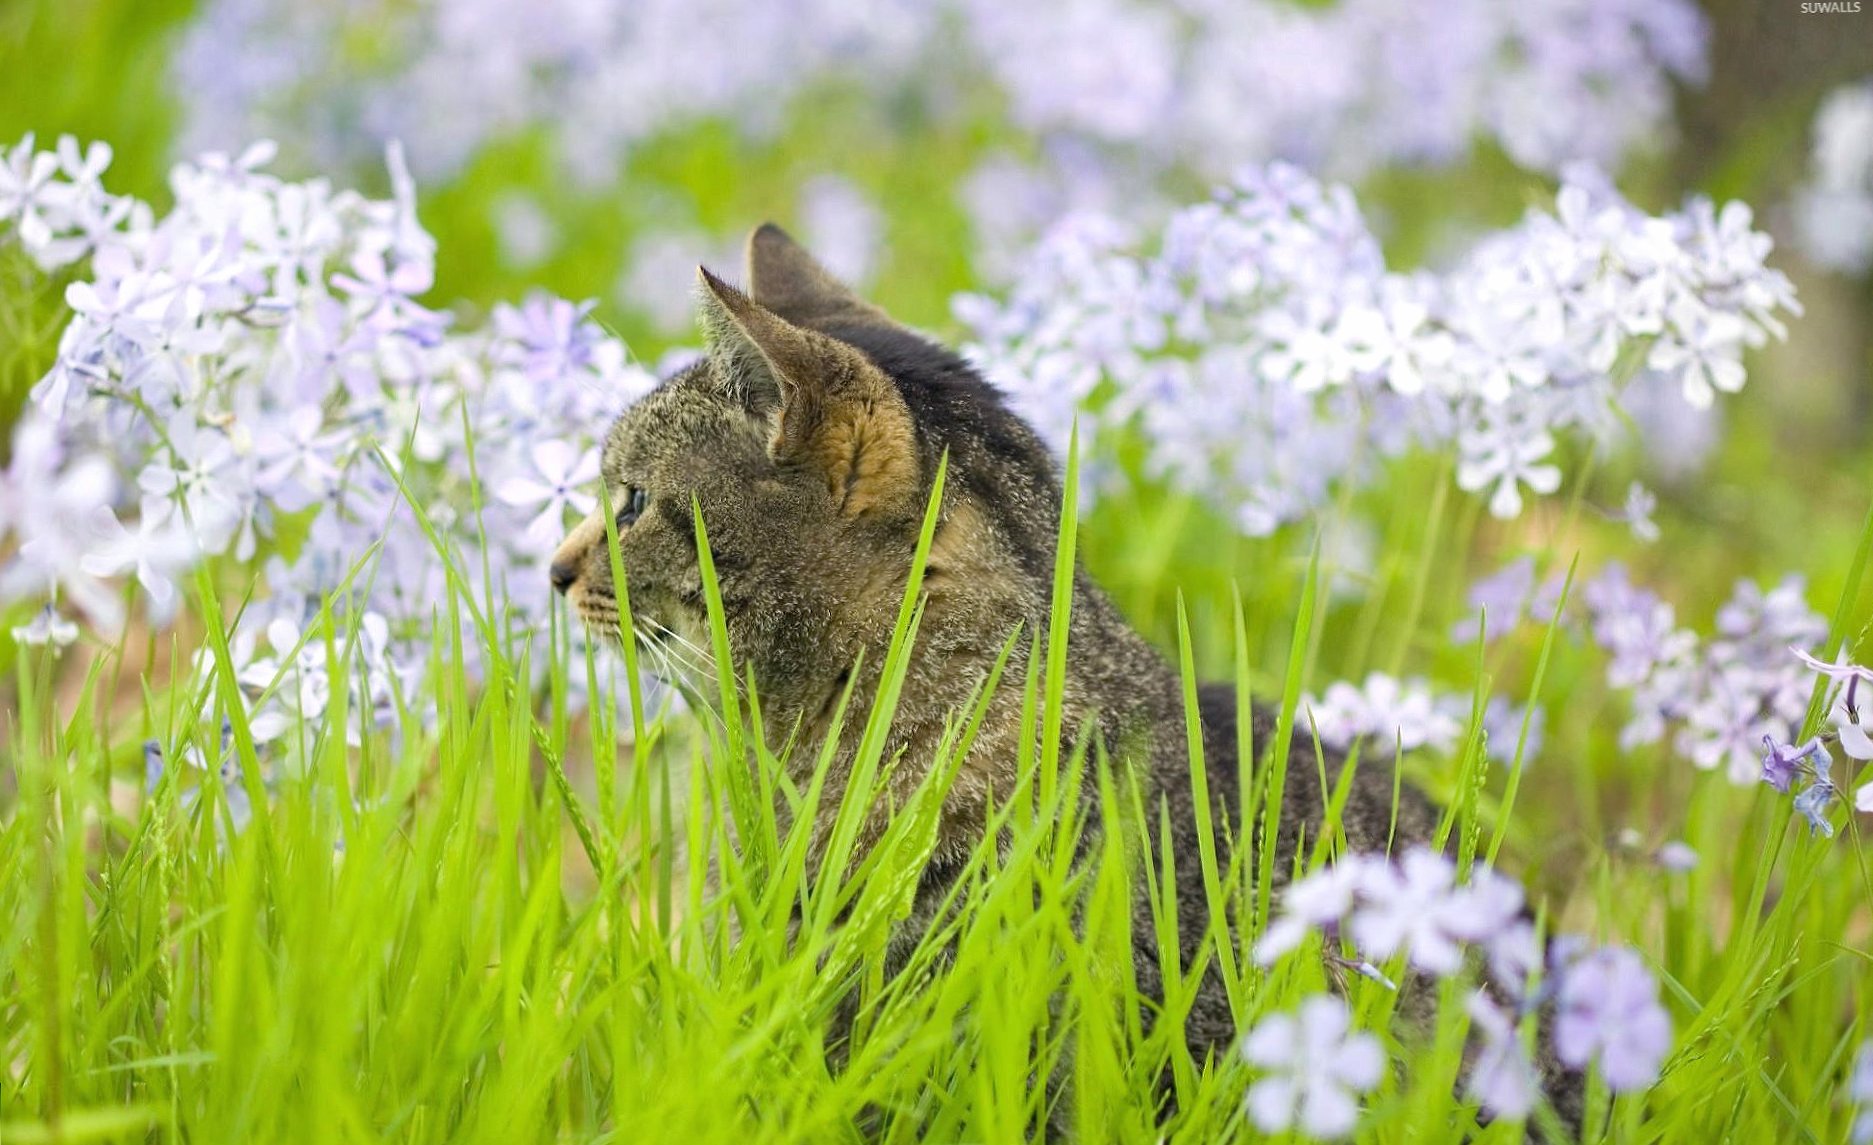 Kitten looking at the flowers in the grass wallpapers HD quality